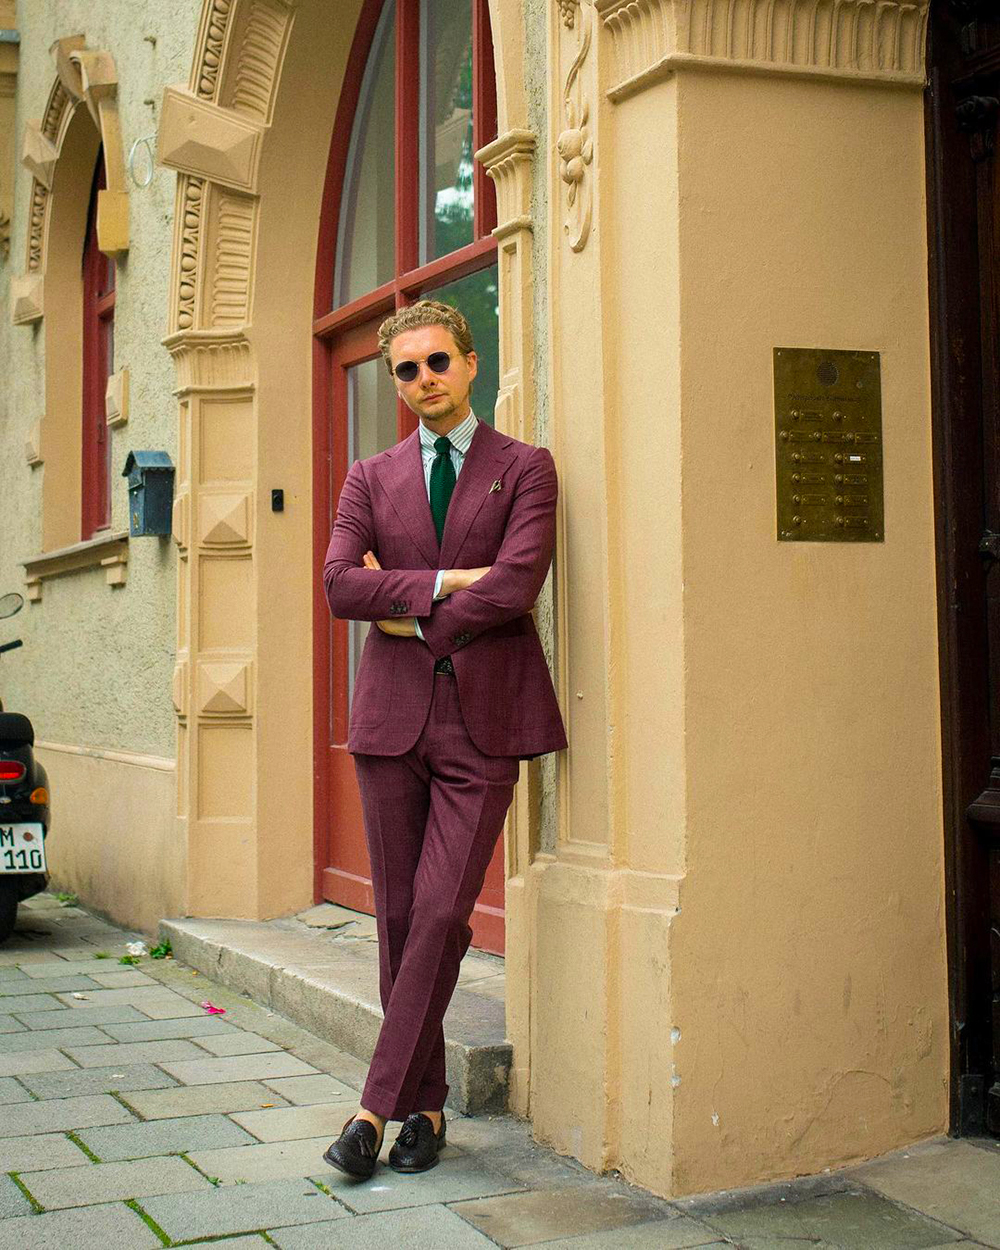 Burgundy suit, white and green dress shirt, black tassel loafers outfit